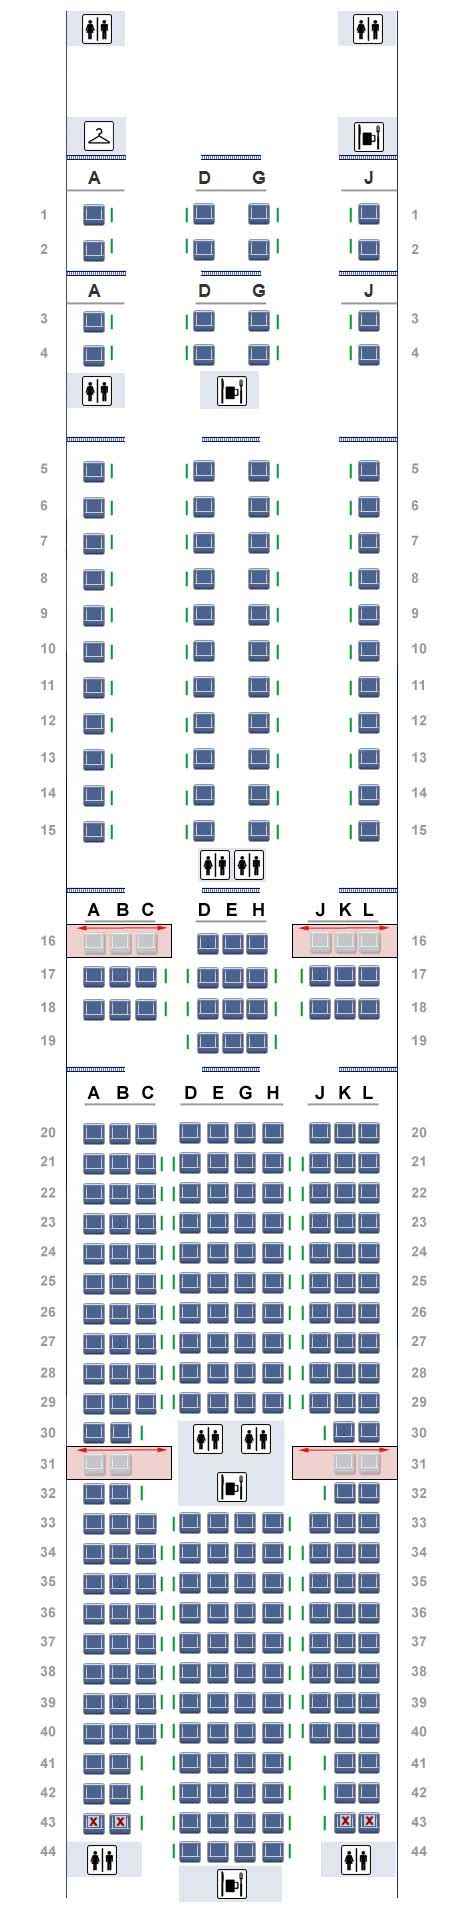 Seat Map For Americans 777 300er Image American Airlines